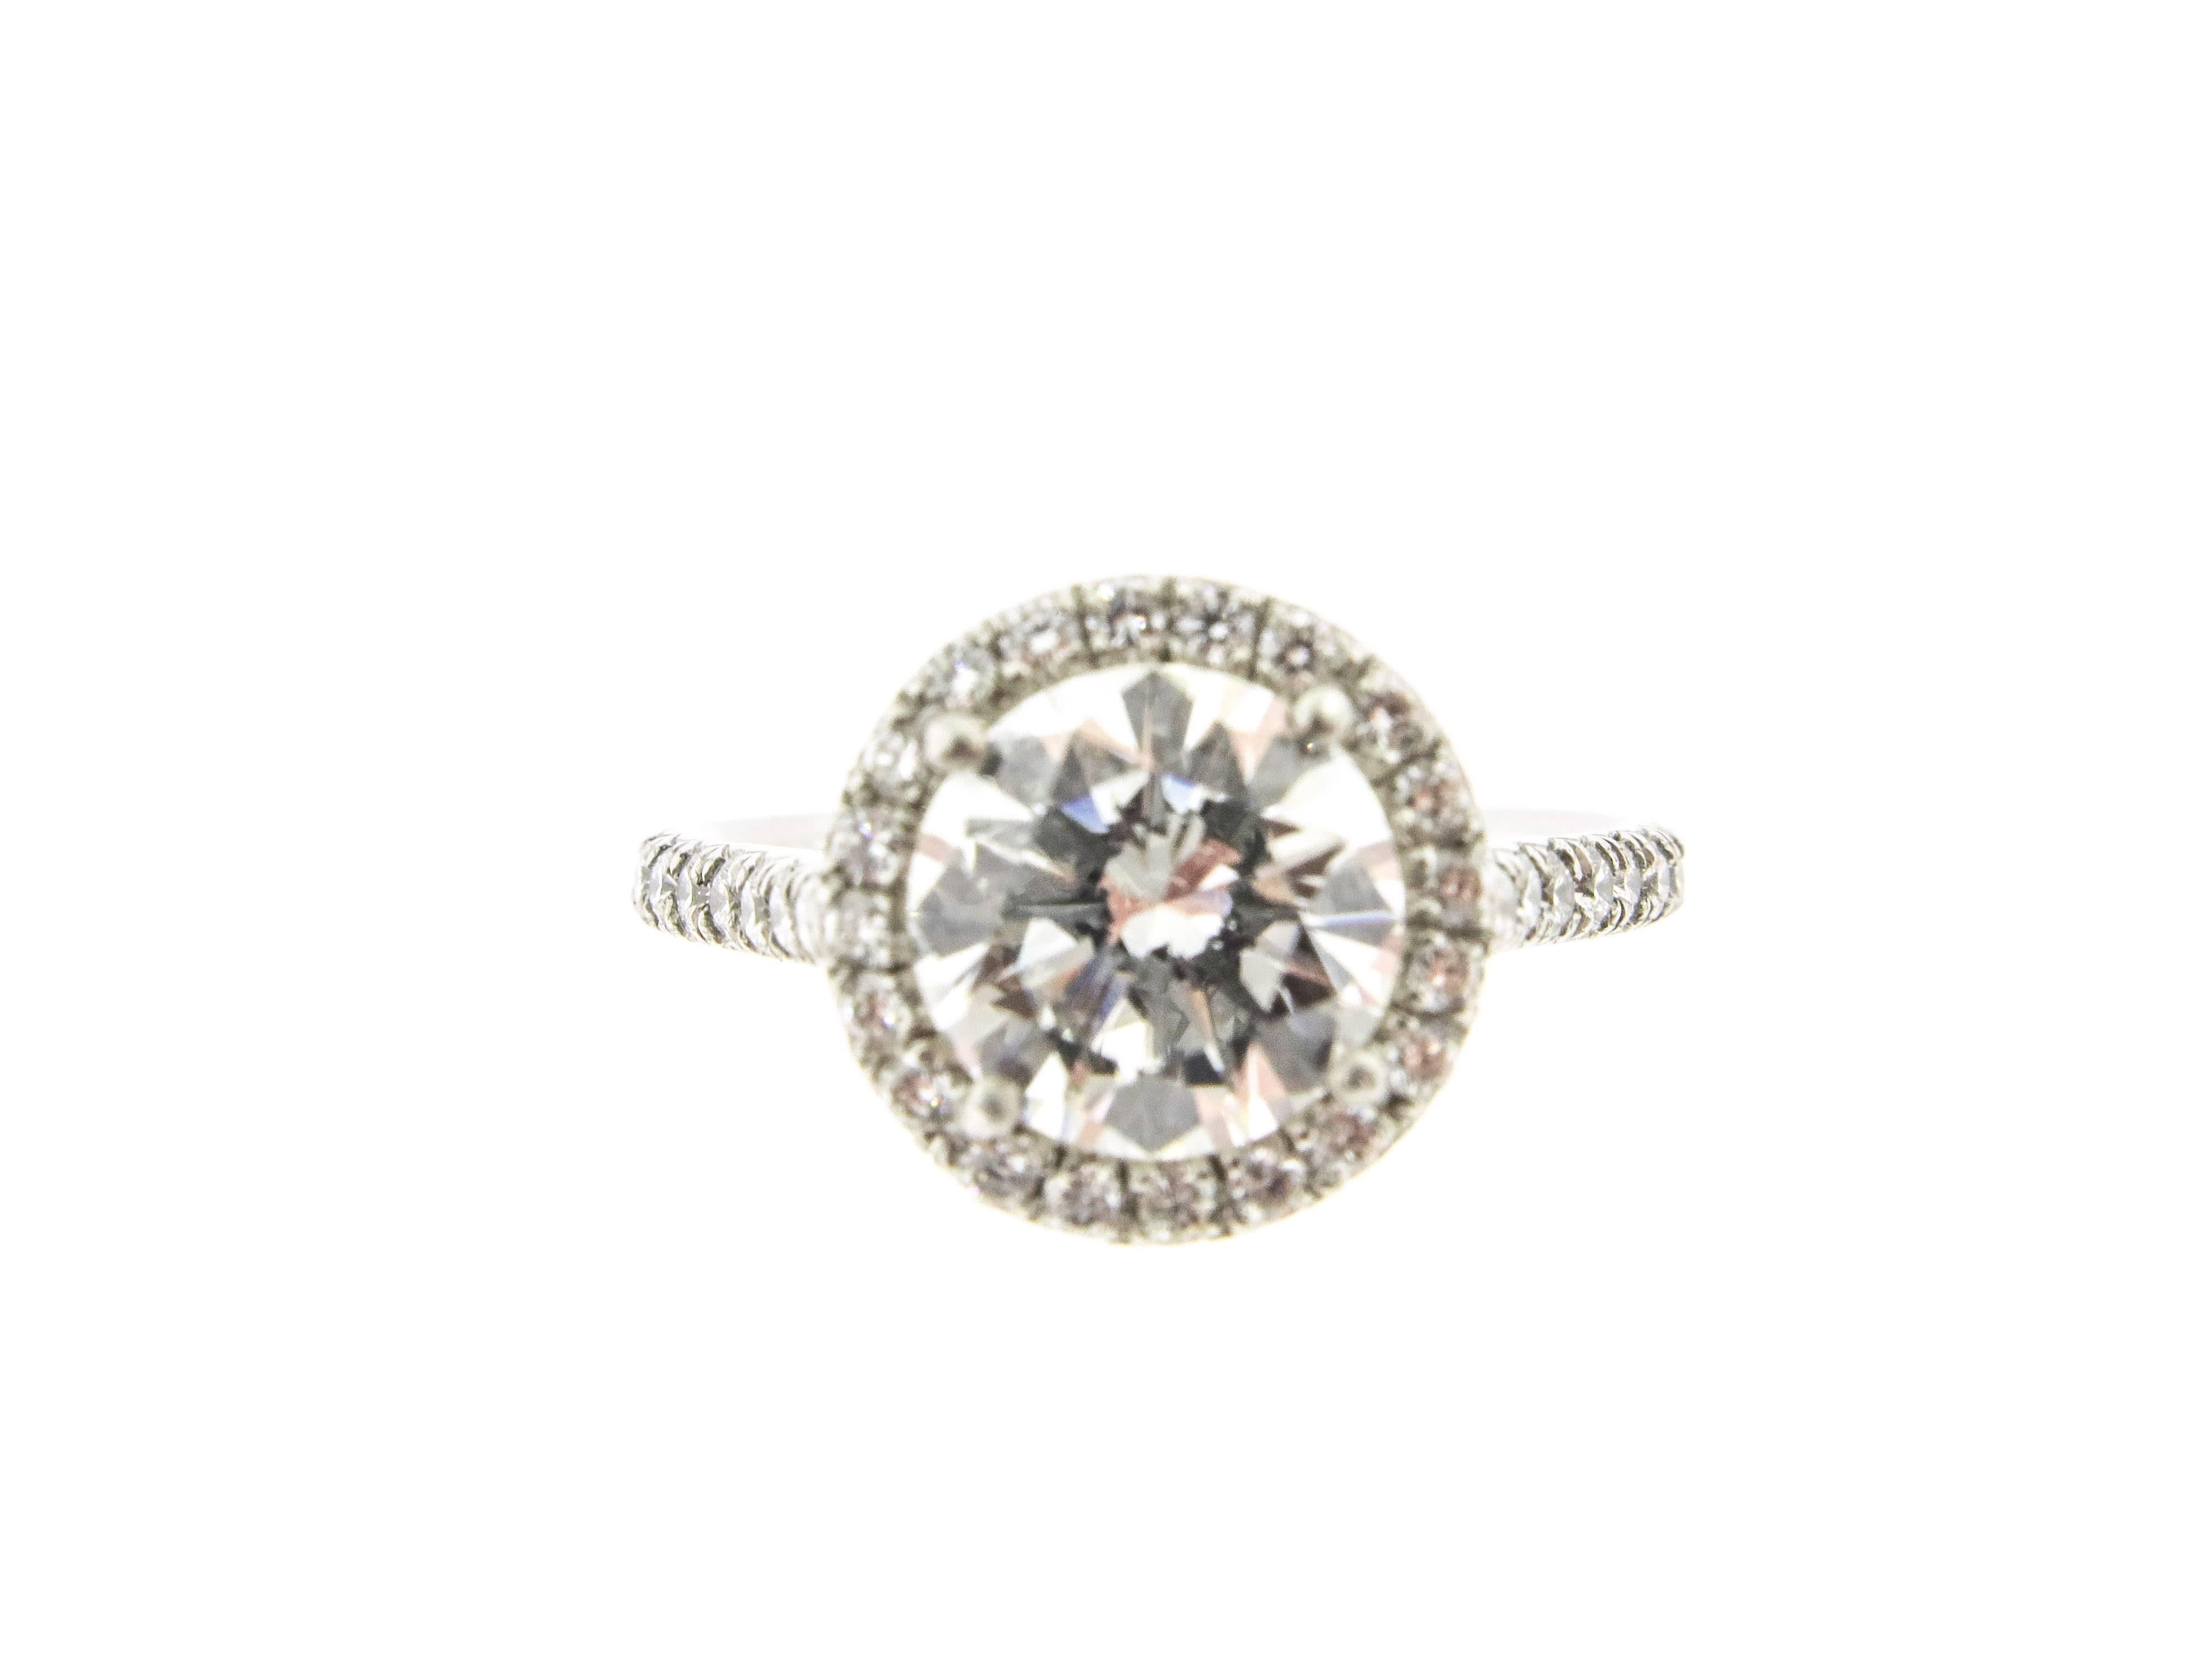 The craftsmenship is oustanding!  Surrounding a round cut diamond with exquisite bead-set diamonds that cast a halo of sparkling light. The center diamond weighs 2.03 carats. H color and VVS2 clarity. GIA certified. The additional diamonds weigh .50